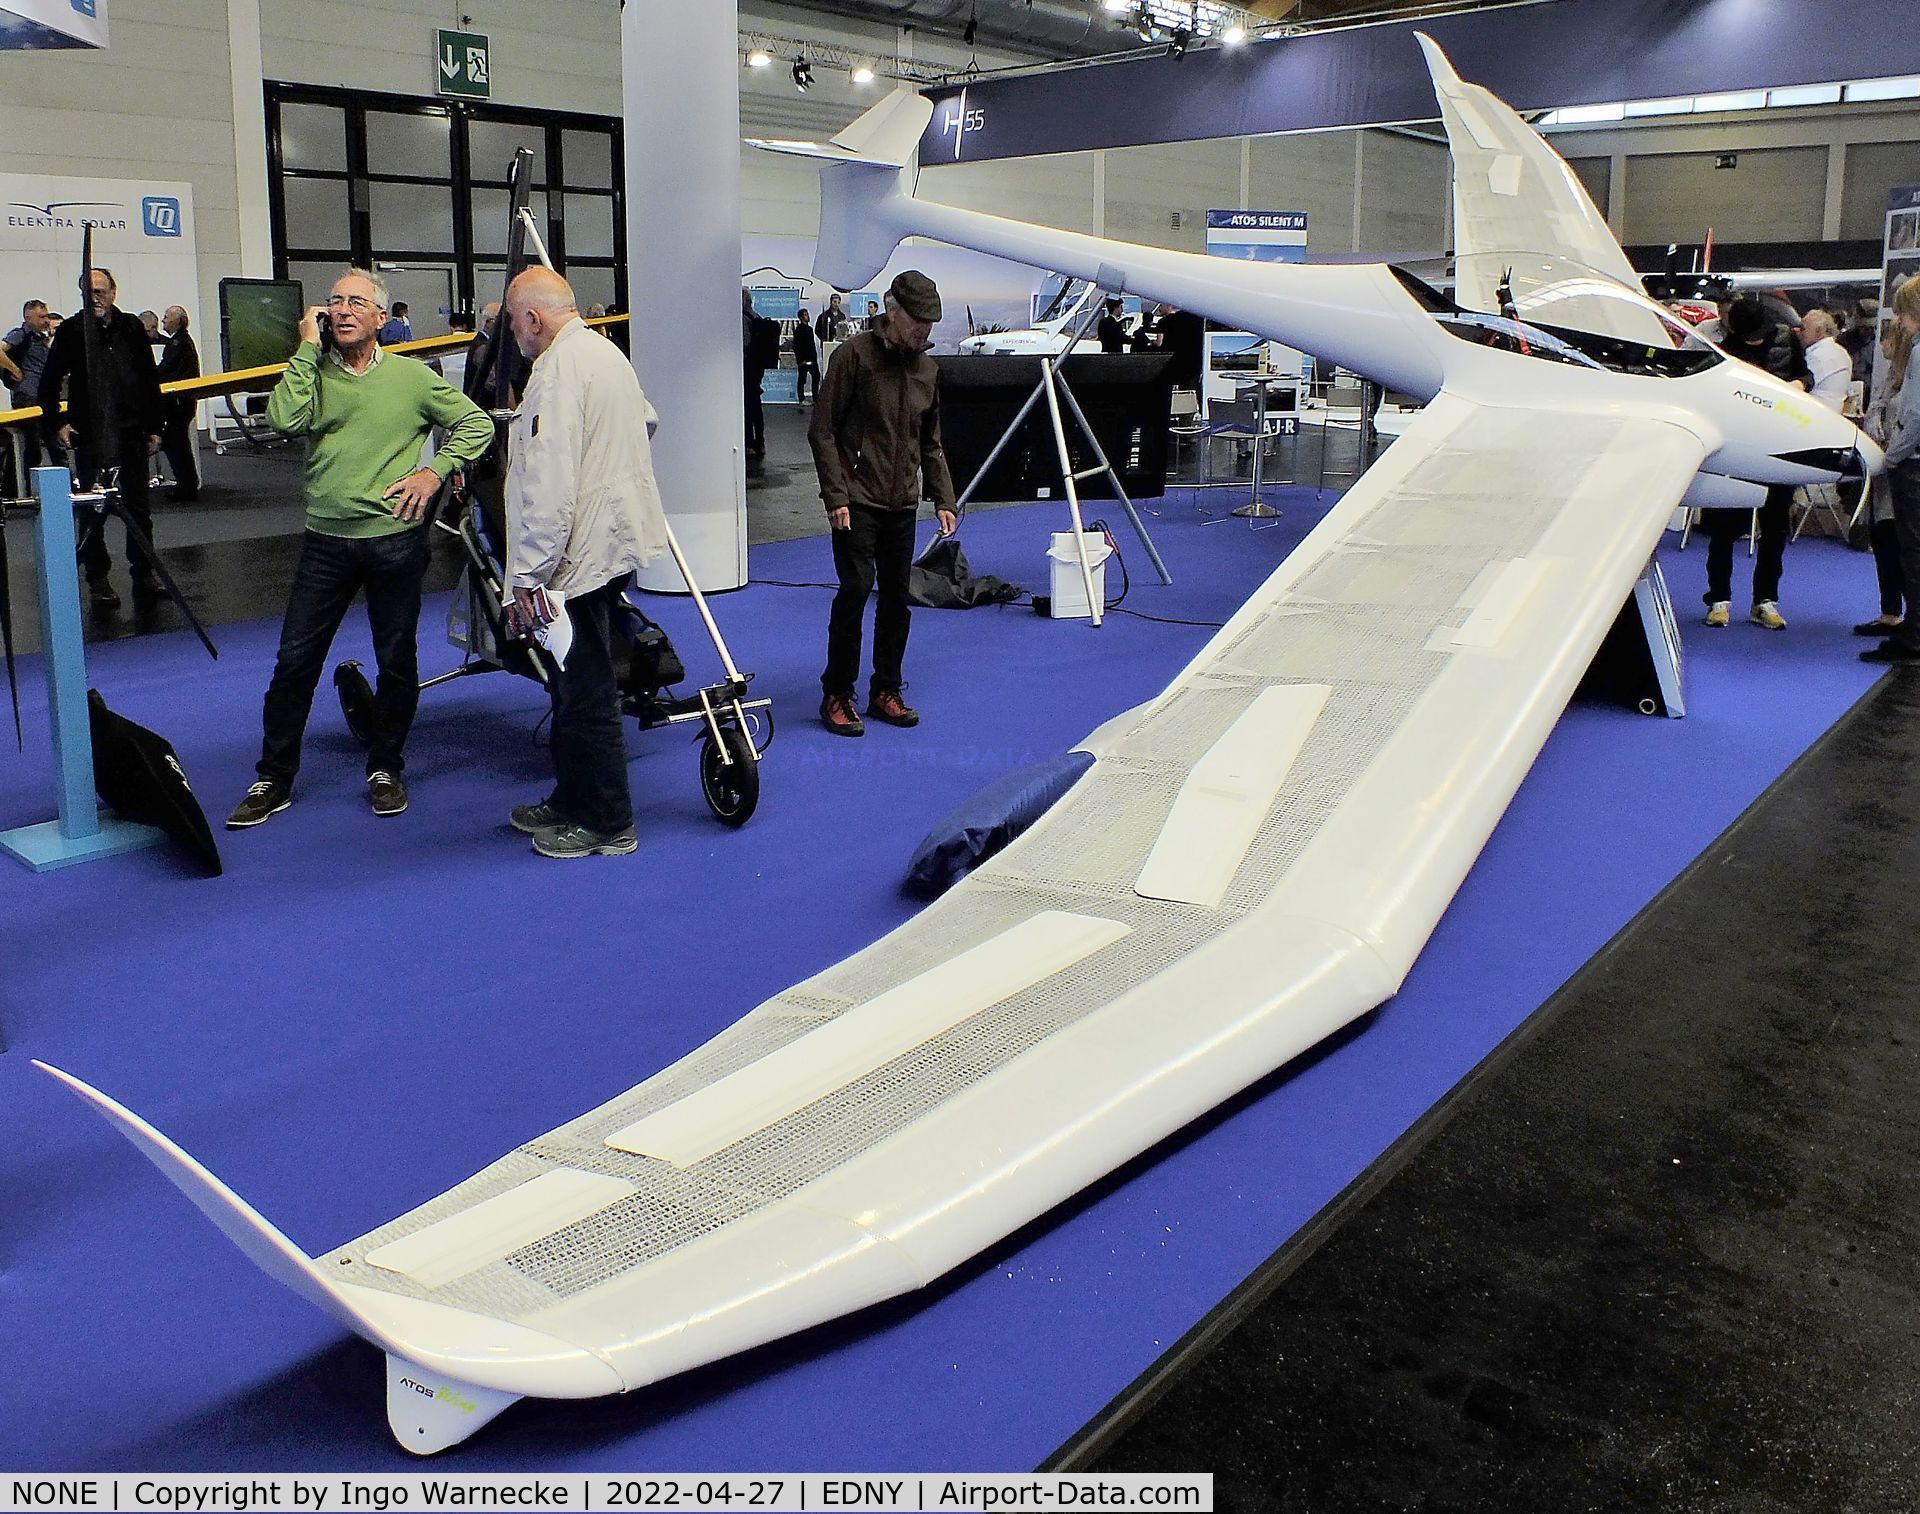 NONE, A-I-R ATOS Wing C/N not found_none, A-I-R ATOS Wing with electric motor at the AERO 2022, Friedrichshafen